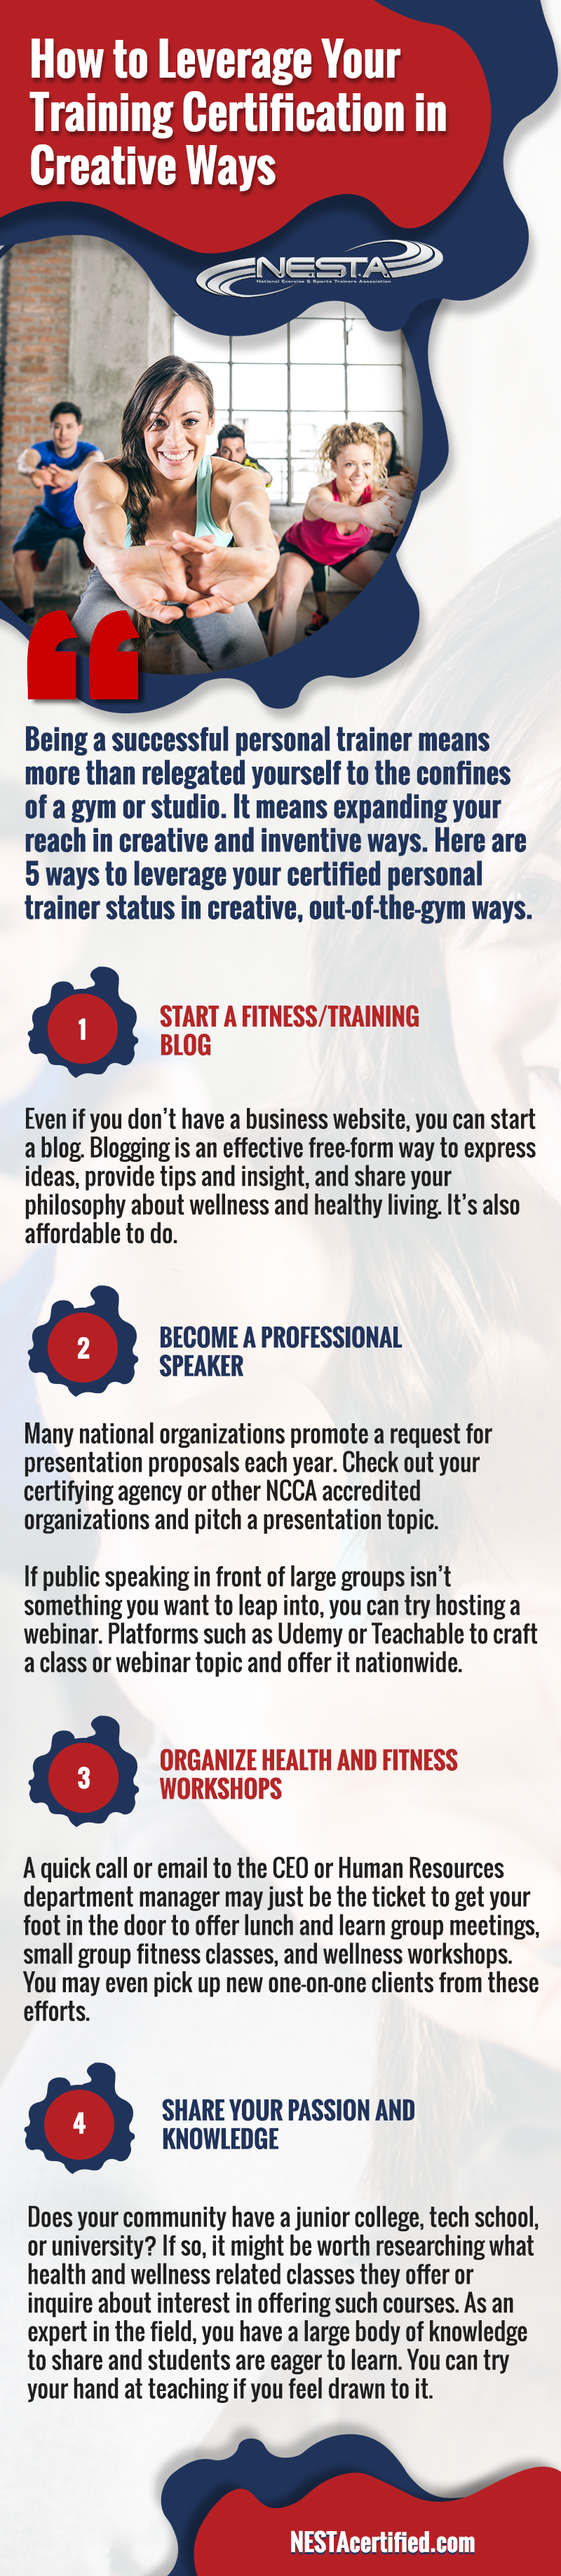 personal-fitness-trainer-infographic-16